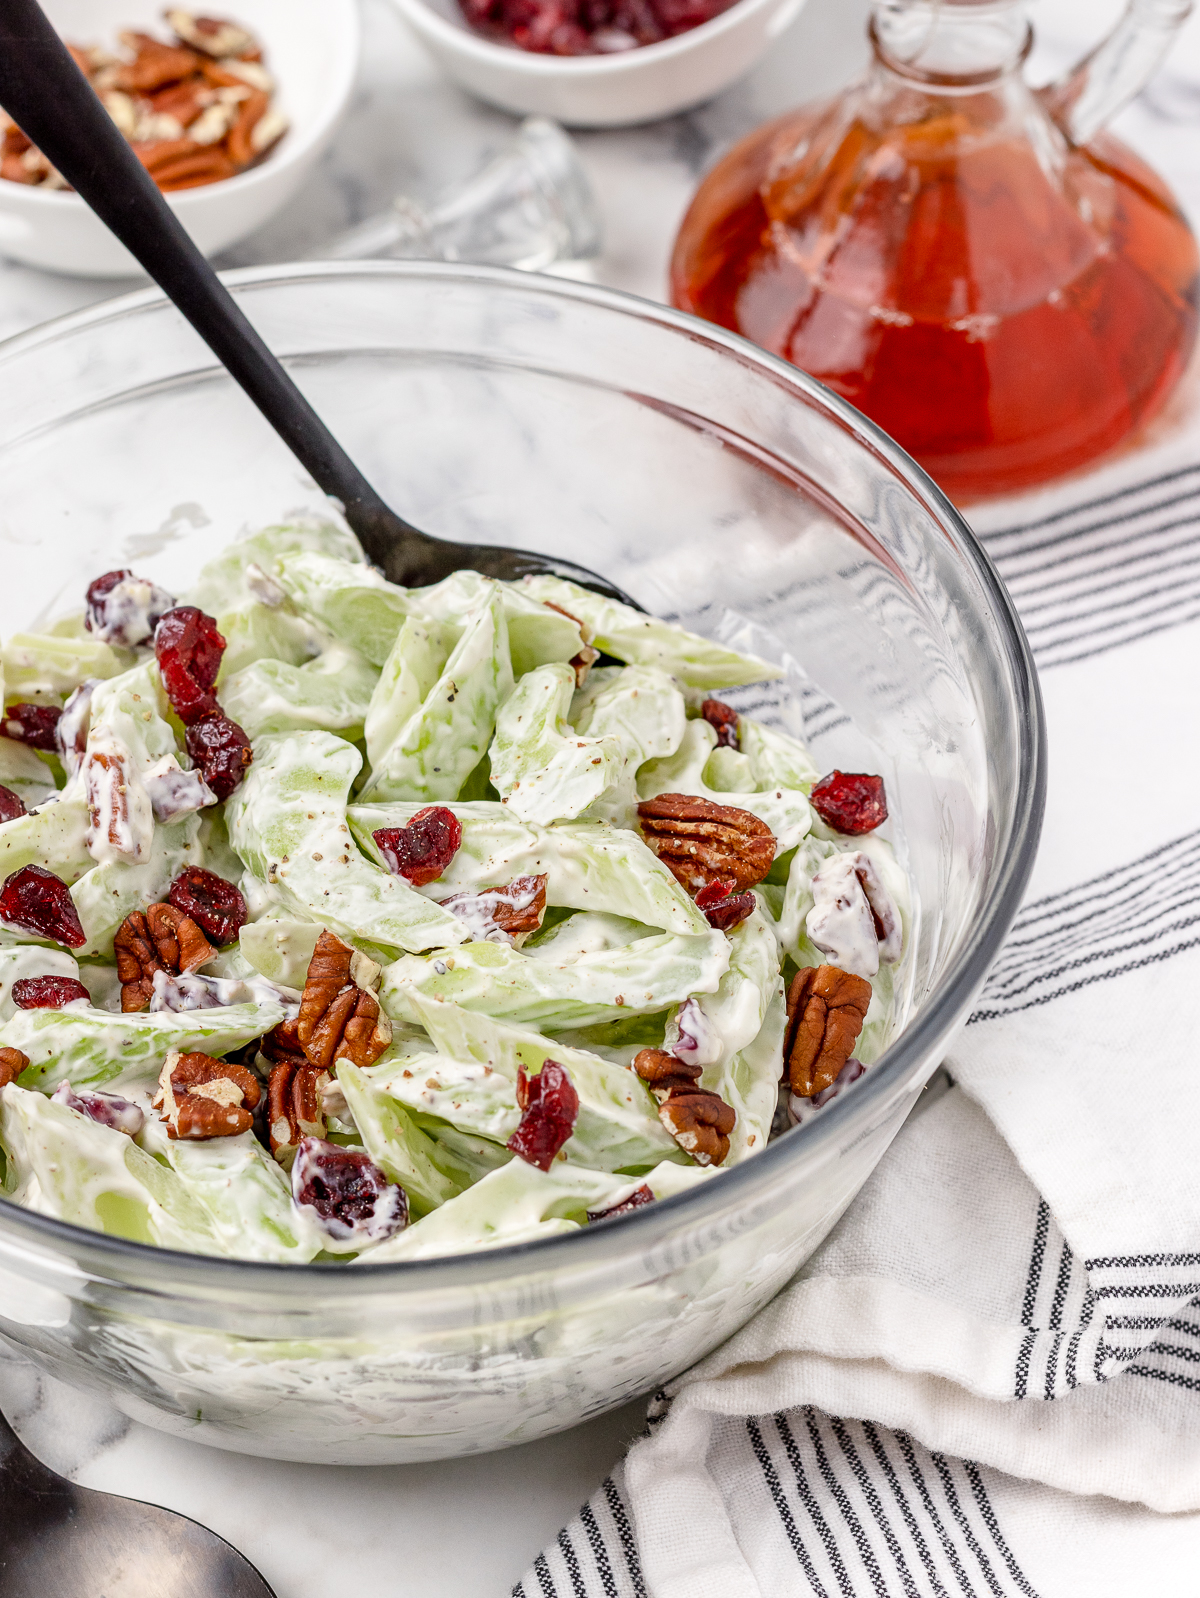 A big bowl salad and a spoon ready for serving. Creamy dressing coated celery, toasted pecans, and dried cranberries.